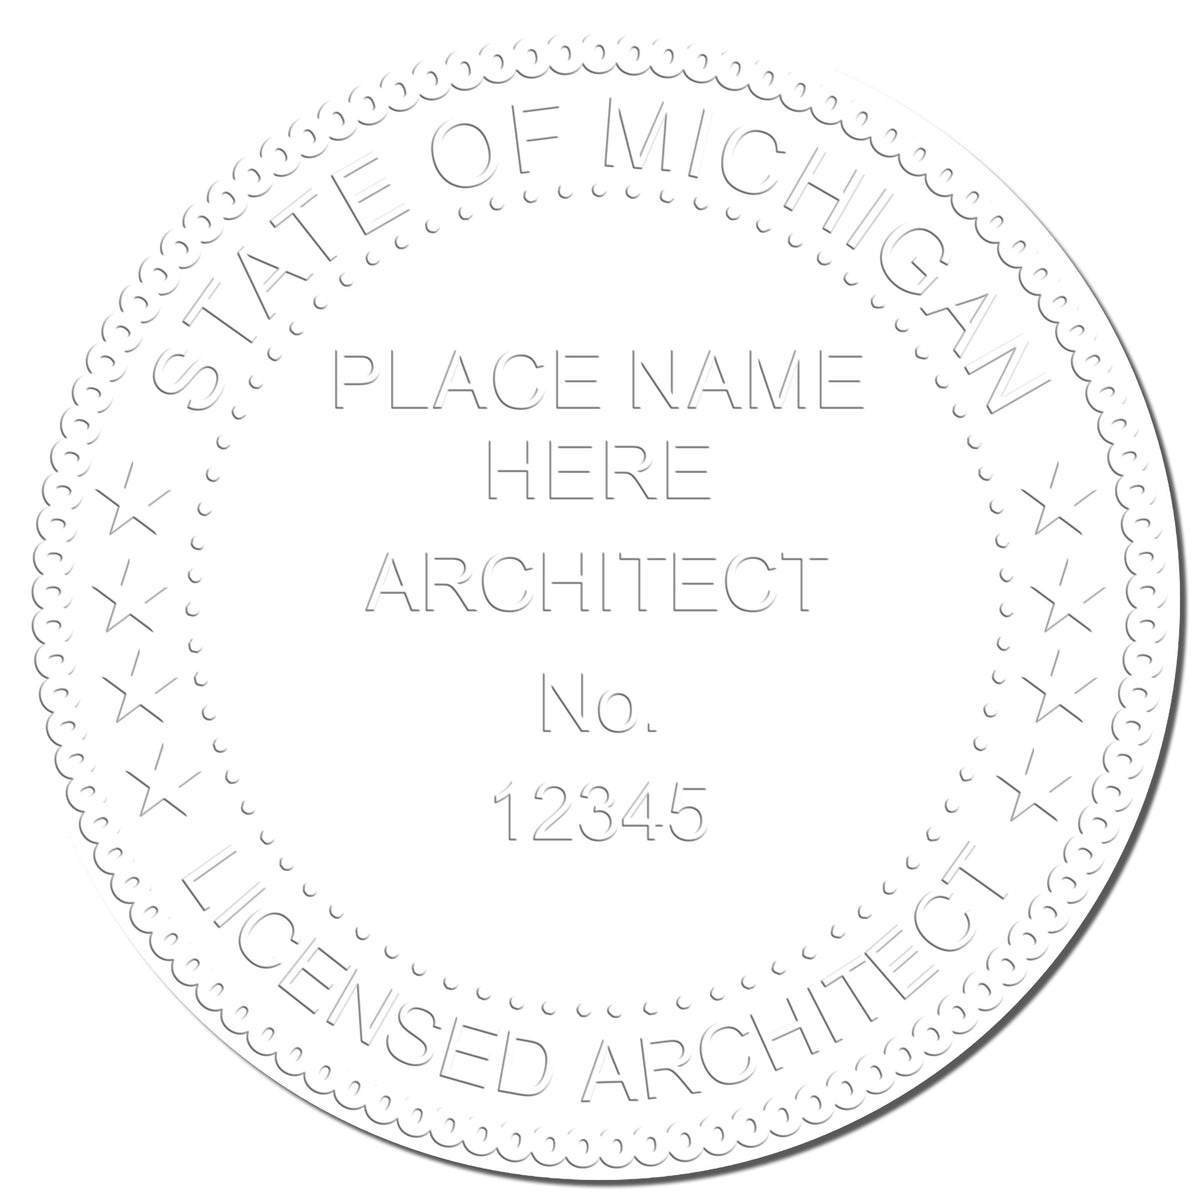 This paper is stamped with a sample imprint of the Hybrid Michigan Architect Seal, signifying its quality and reliability.